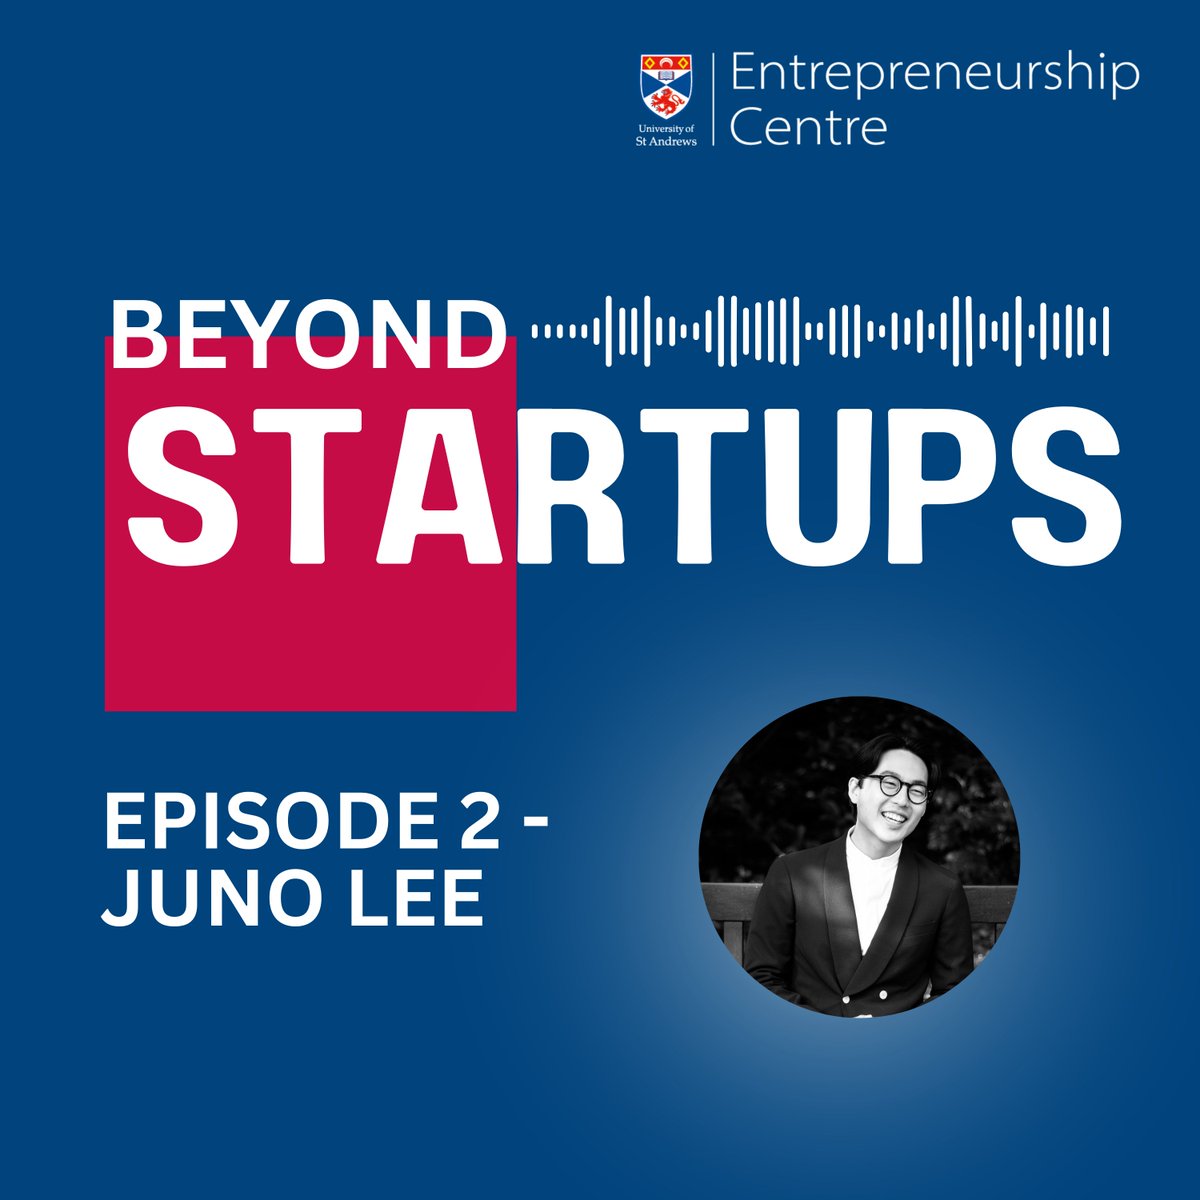 Our new episode of Beyond StArtups is out now! 🗣️ In this episode, we are joined by Juno Lee, founder of CombiniCo. Listen here: ow.ly/8RWx50Rn59m #BeyondStArtups #Entrepreneurship #podcast